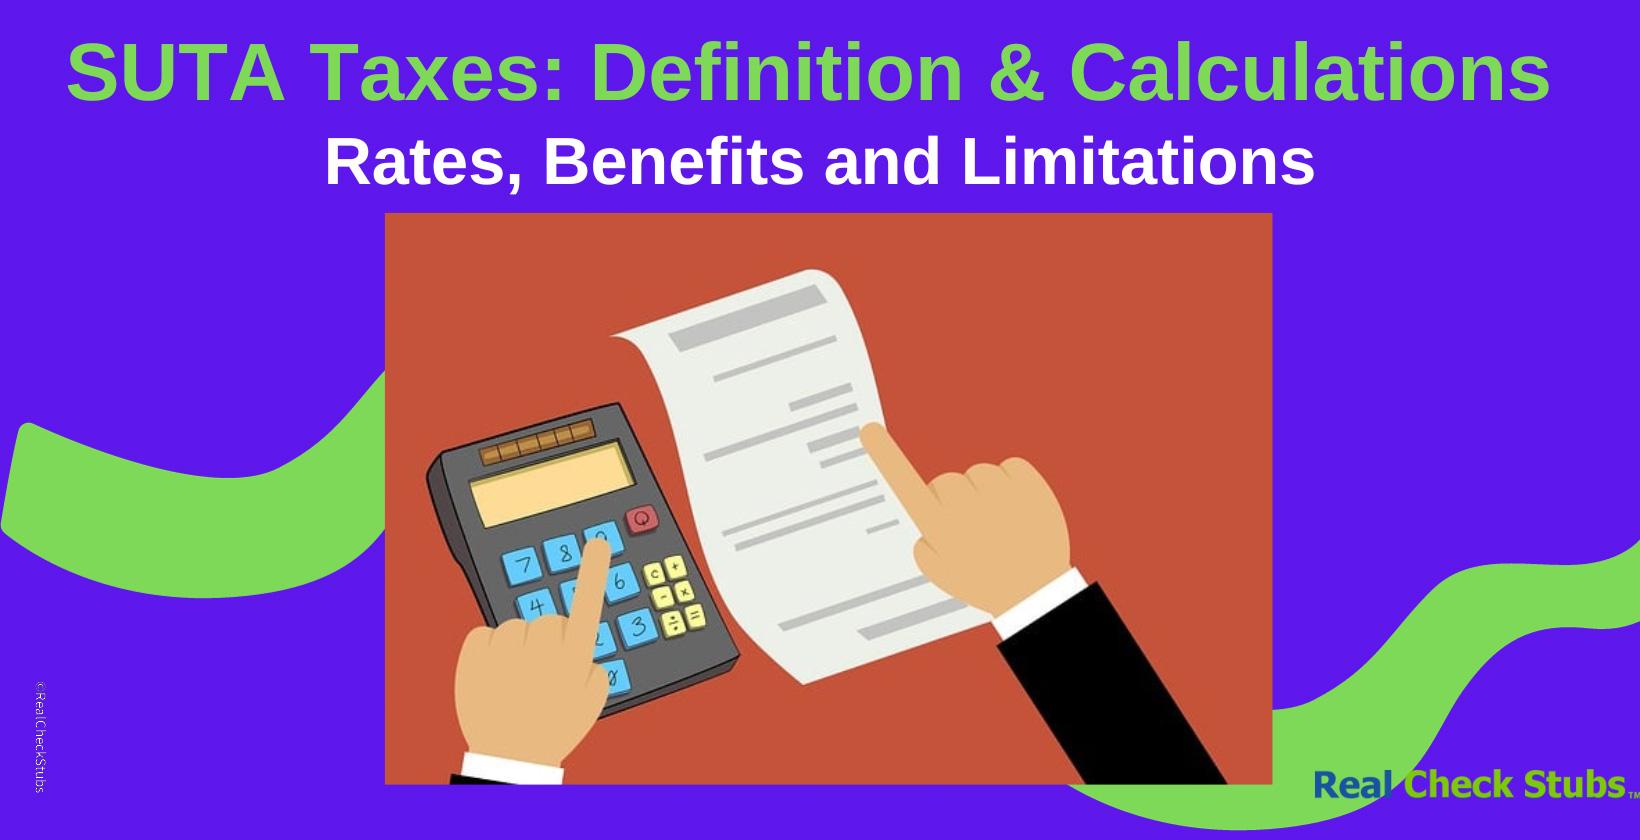 SUTA Taxes Definition, Calculation, Rates, Benefits, and Limitations